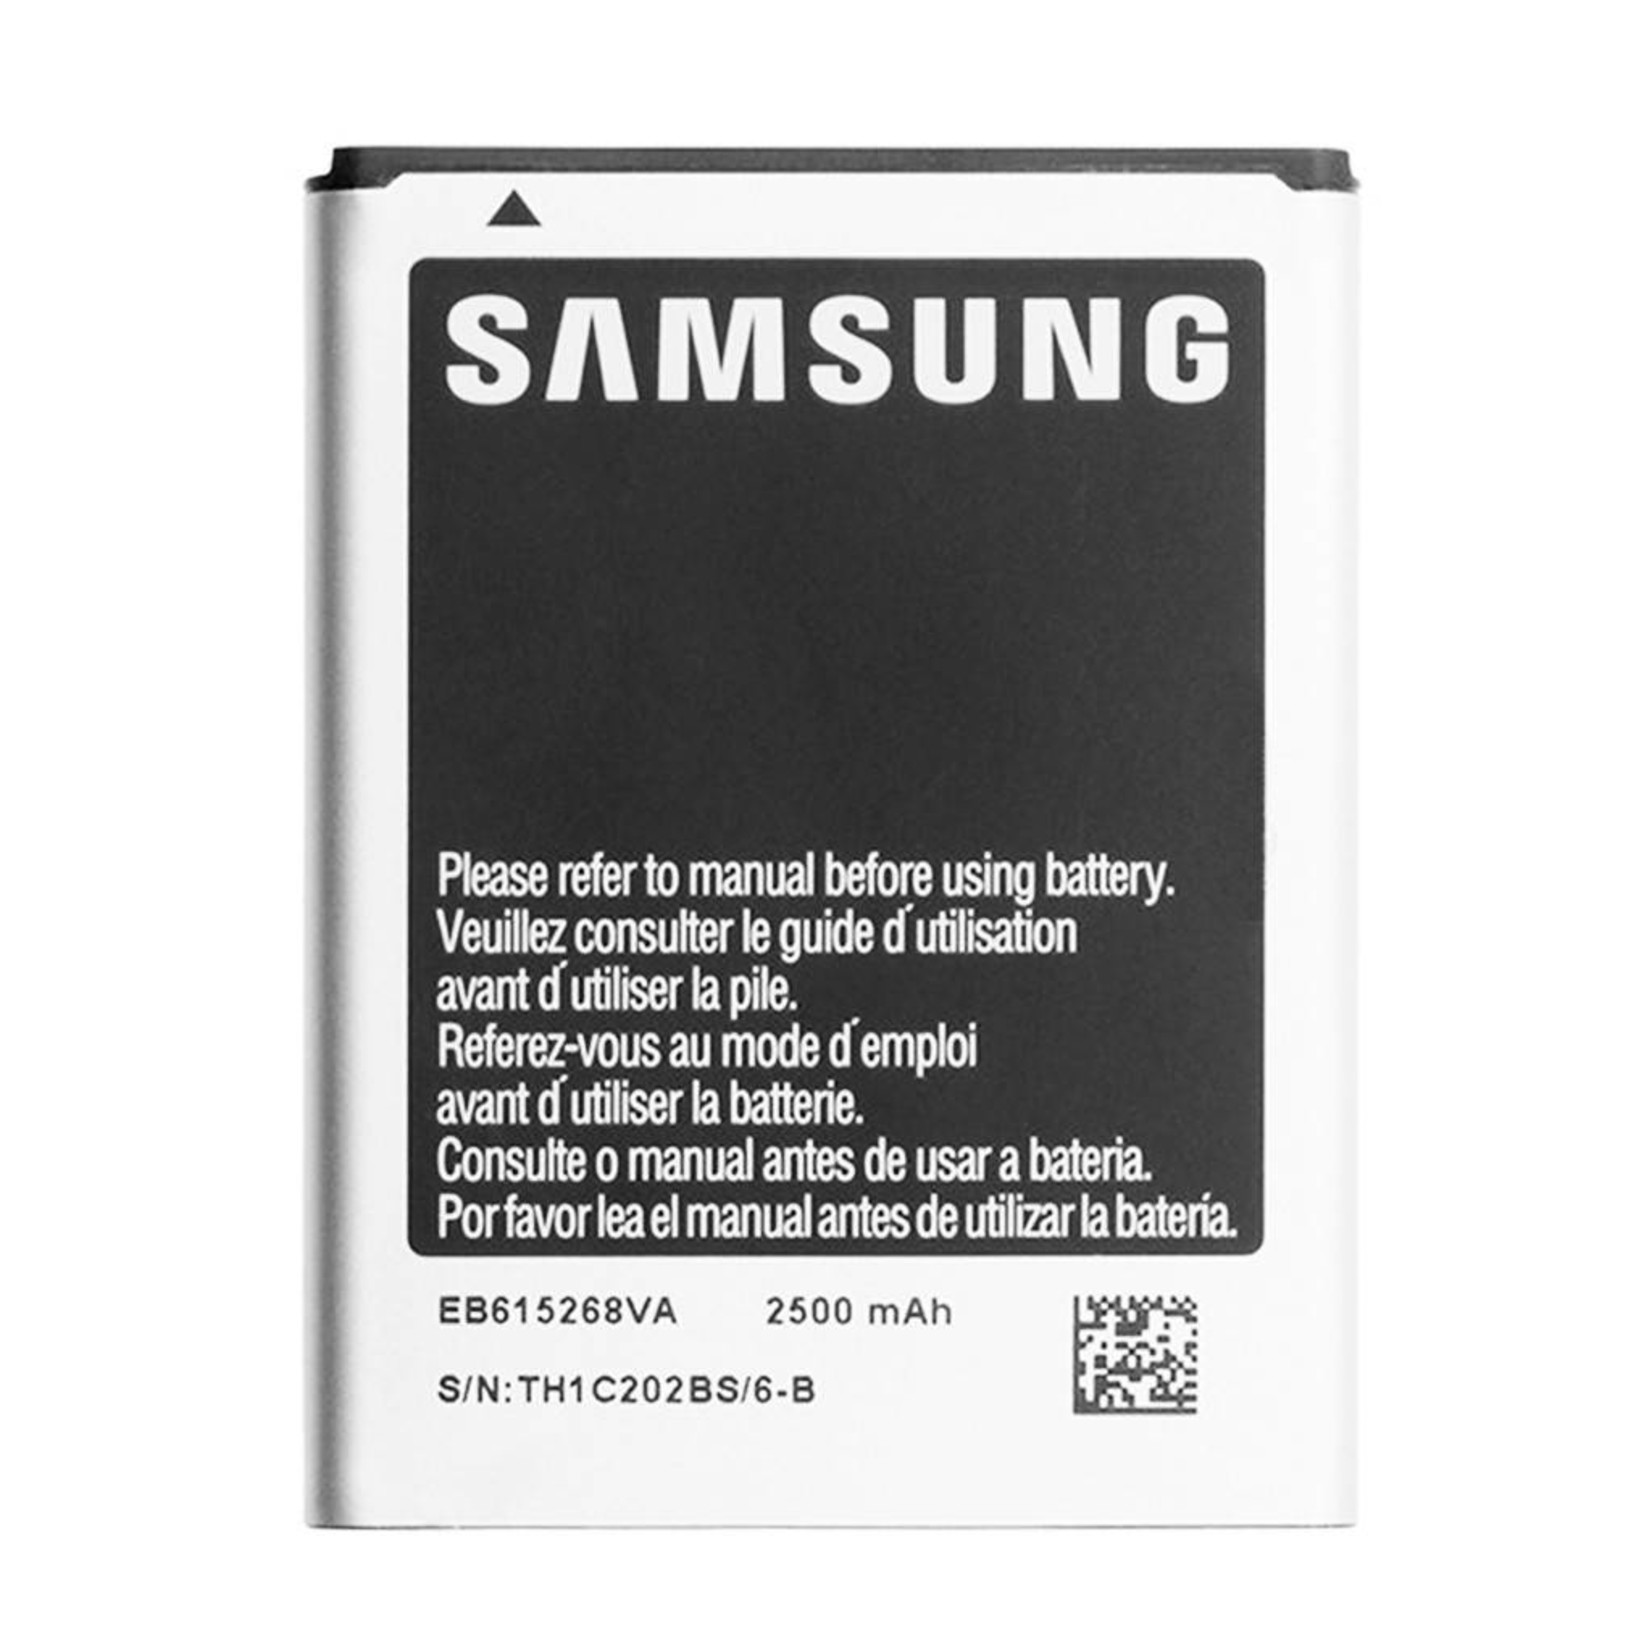 Battery for Samsung Galaxy Note 1 (717 / T879 / N70000) - 2,500mAh